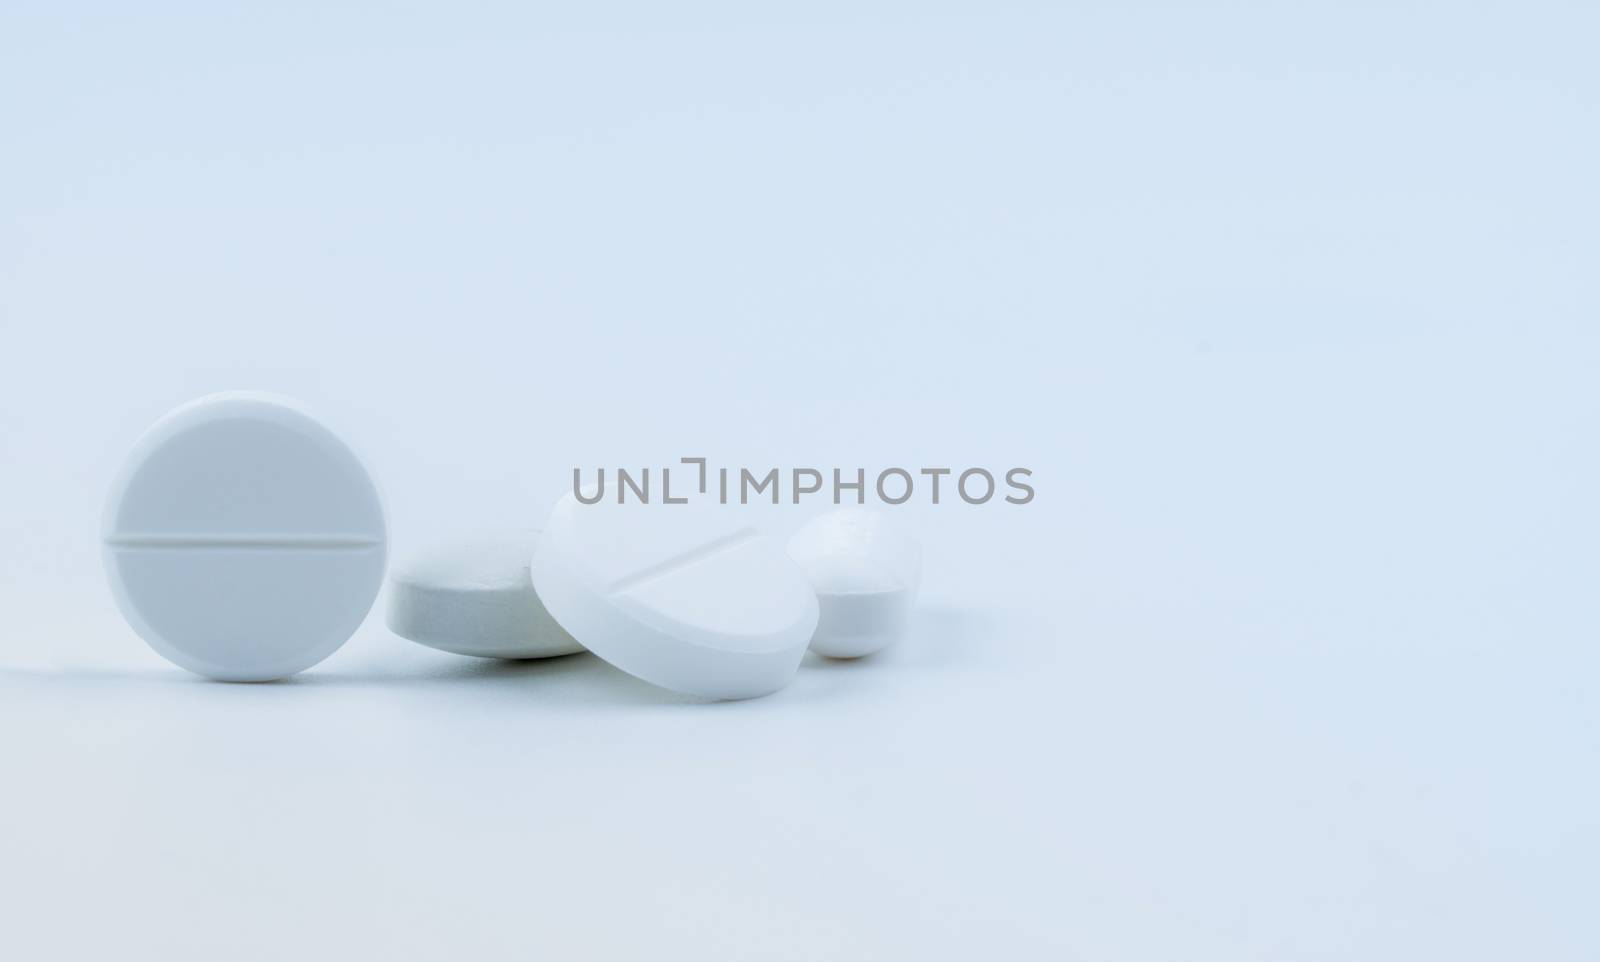 Pile of white round tablet pills isolated on white background. Pharmaceutical industry. Pharmacy or drugstore sign and symbol. Global healthcare concept. Health and pharmacology.